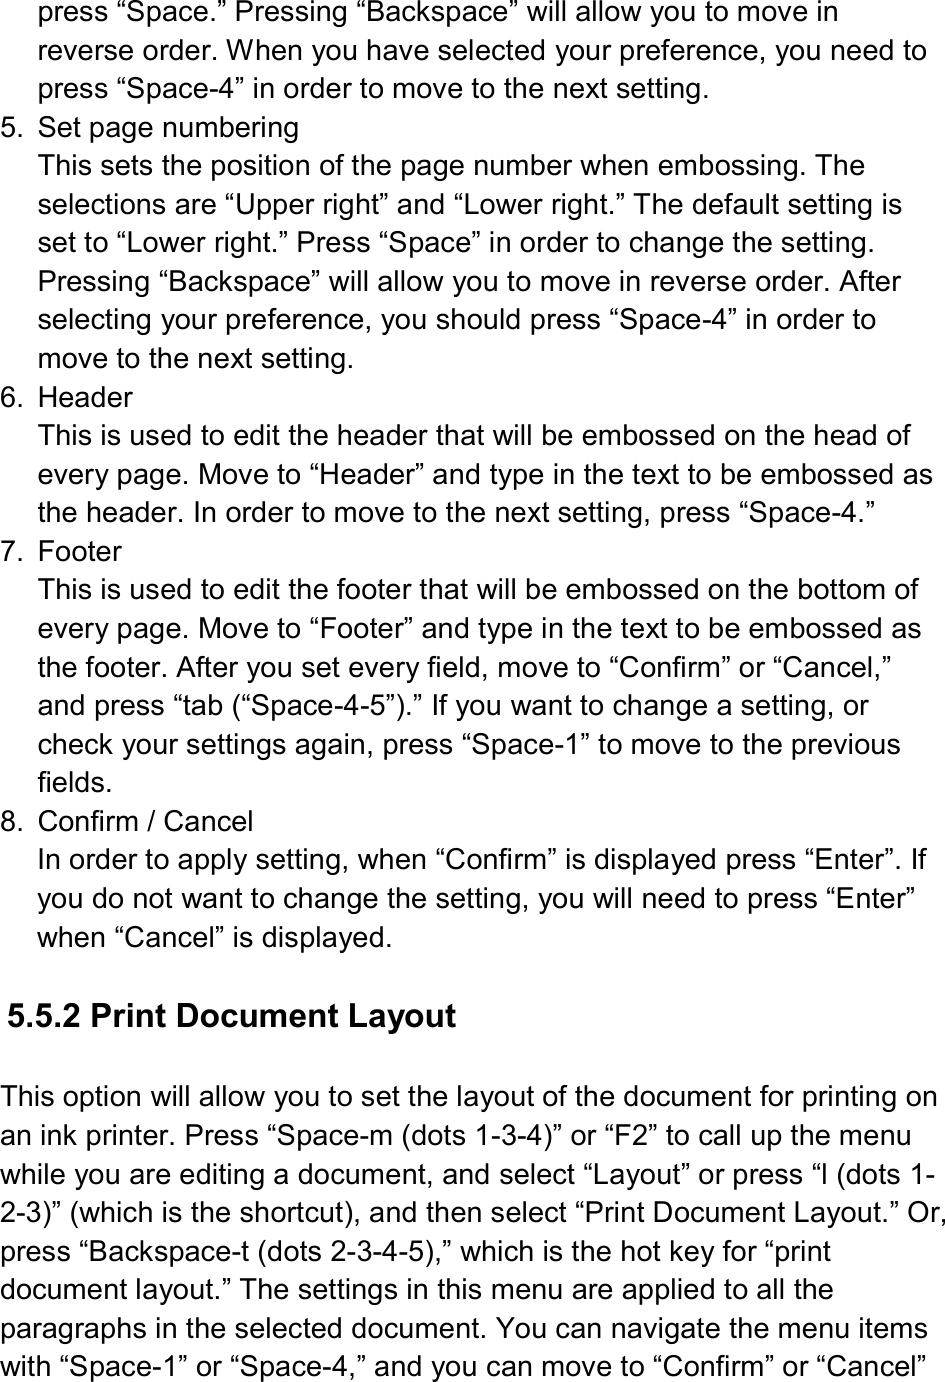  press “Space.” Pressing “Backspace” will allow you to move in reverse order. When you have selected your preference, you need to press “Space-4” in order to move to the next setting. 5.  Set page numbering This sets the position of the page number when embossing. The selections are “Upper right” and “Lower right.” The default setting is set to “Lower right.” Press “Space” in order to change the setting. Pressing “Backspace” will allow you to move in reverse order. After selecting your preference, you should press “Space-4” in order to move to the next setting. 6.  Header This is used to edit the header that will be embossed on the head of every page. Move to “Header” and type in the text to be embossed as the header. In order to move to the next setting, press “Space-4.” 7.  Footer This is used to edit the footer that will be embossed on the bottom of every page. Move to “Footer” and type in the text to be embossed as the footer. After you set every field, move to “Confirm” or “Cancel,” and press “tab (“Space-4-5”).” If you want to change a setting, or check your settings again, press “Space-1” to move to the previous fields. 8.  Confirm / Cancel In order to apply setting, when “Confirm” is displayed press “Enter”. If you do not want to change the setting, you will need to press “Enter” when “Cancel” is displayed.  5.5.2 Print Document Layout  This option will allow you to set the layout of the document for printing on an ink printer. Press “Space-m (dots 1-3-4)” or “F2” to call up the menu while you are editing a document, and select “Layout” or press “l (dots 1-2-3)” (which is the shortcut), and then select “Print Document Layout.” Or, press “Backspace-t (dots 2-3-4-5),” which is the hot key for “print document layout.” The settings in this menu are applied to all the paragraphs in the selected document. You can navigate the menu items with “Space-1” or “Space-4,” and you can move to “Confirm” or “Cancel” 